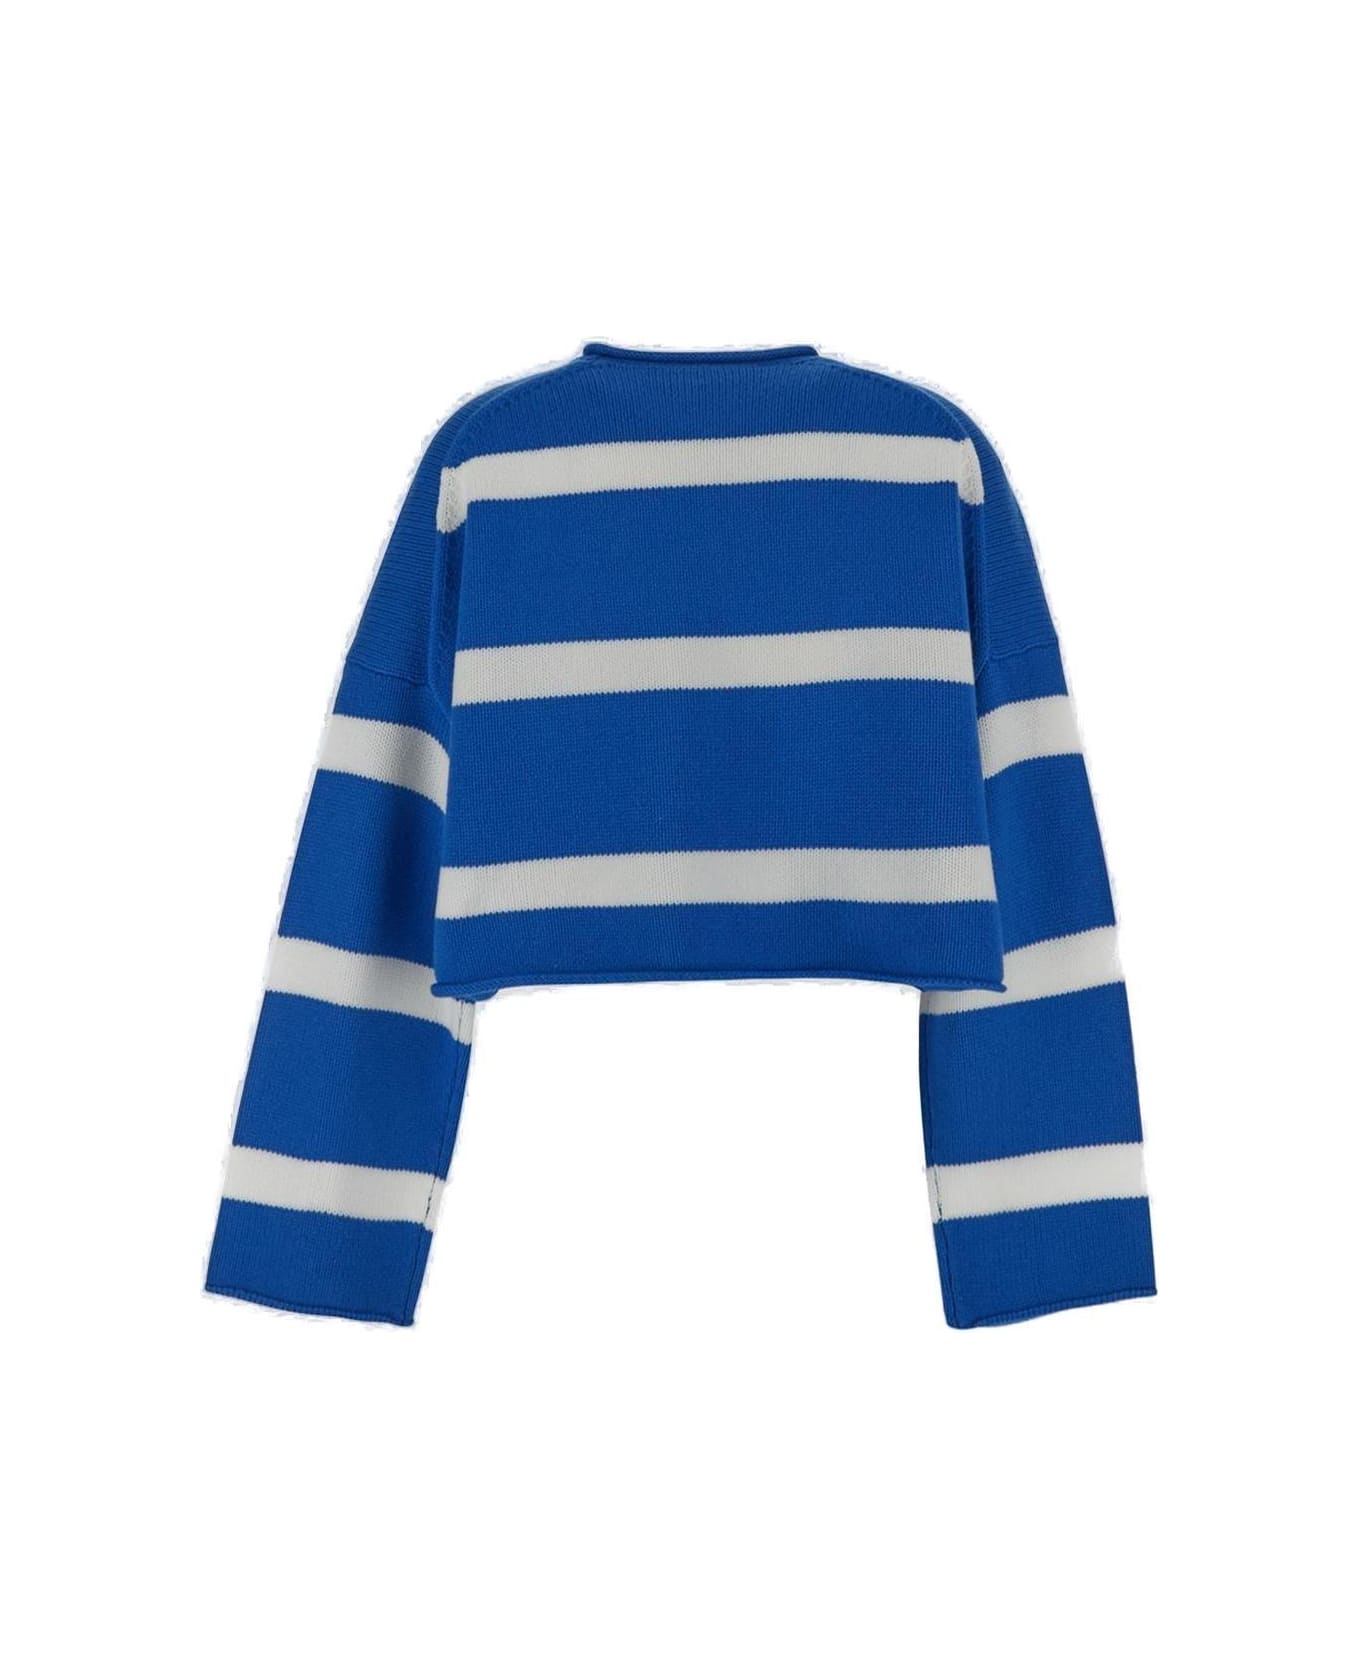 Alexander Wang Logo Embroidered Striped Sweater - GREY ニットウェア